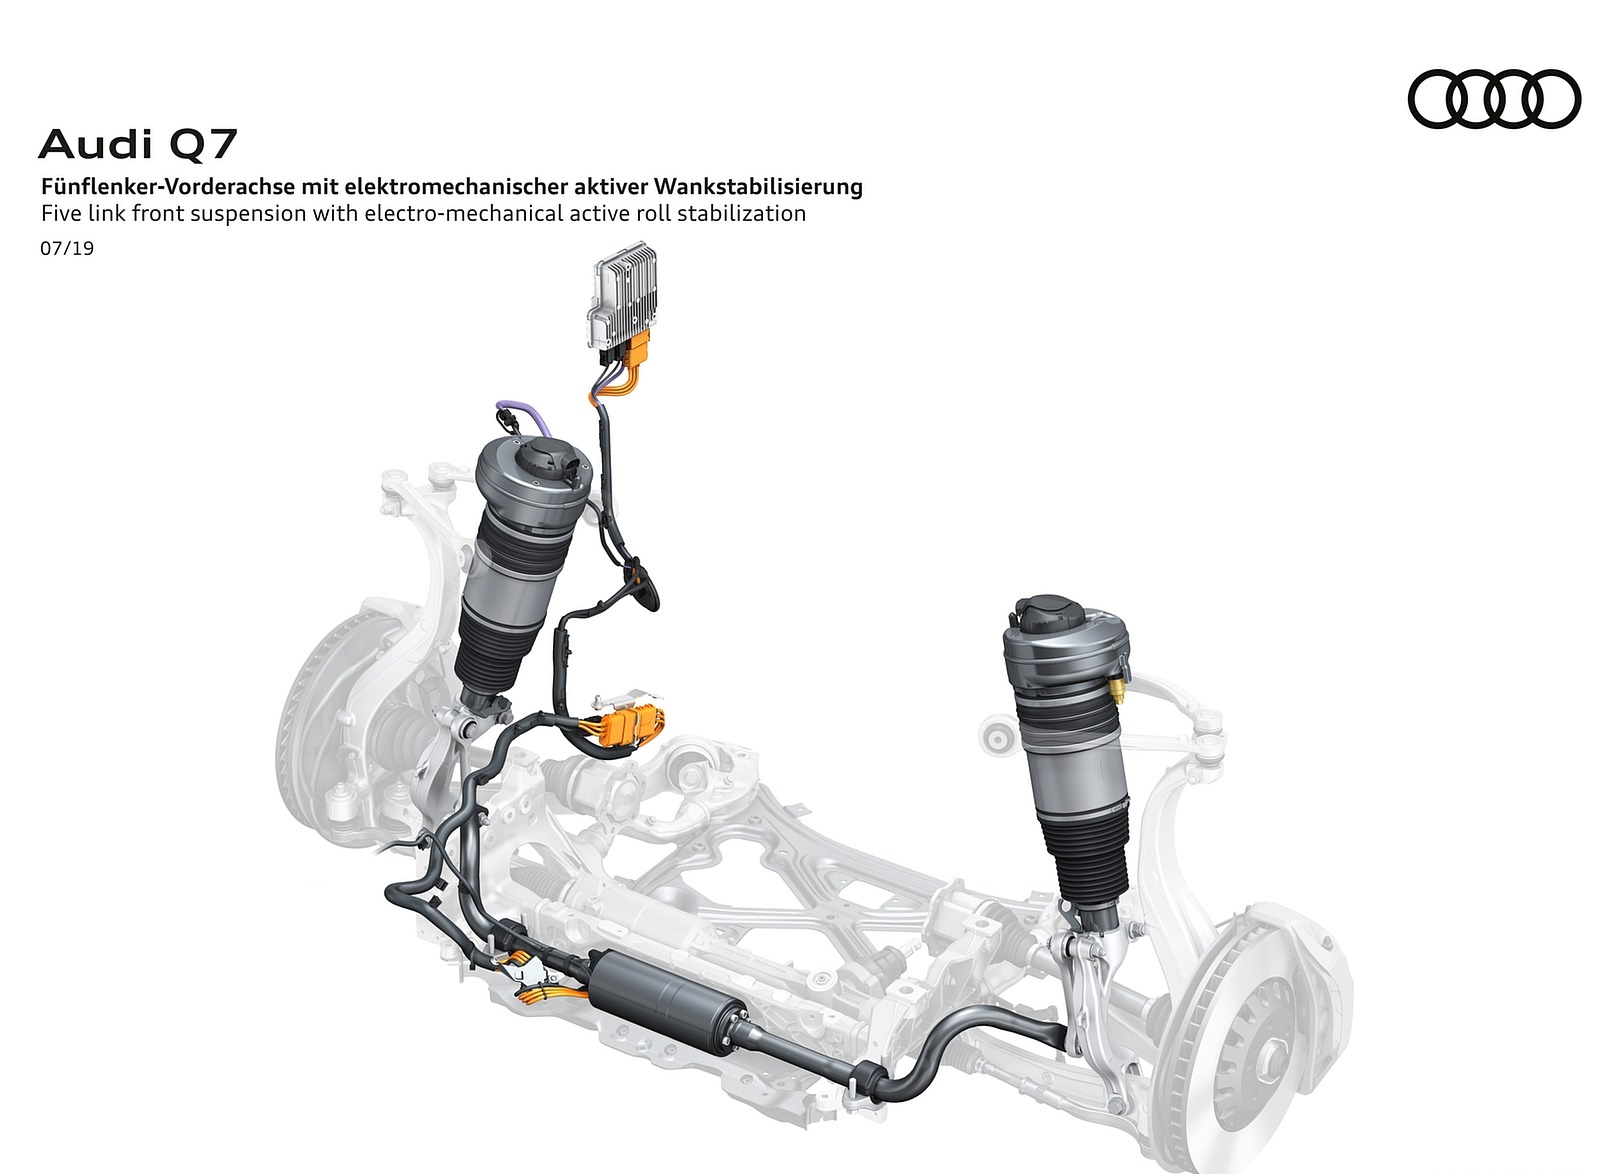 2020 Audi Q7 Five link front suspension with electro-mechanical active roll stabilization Wallpapers #135 of 158